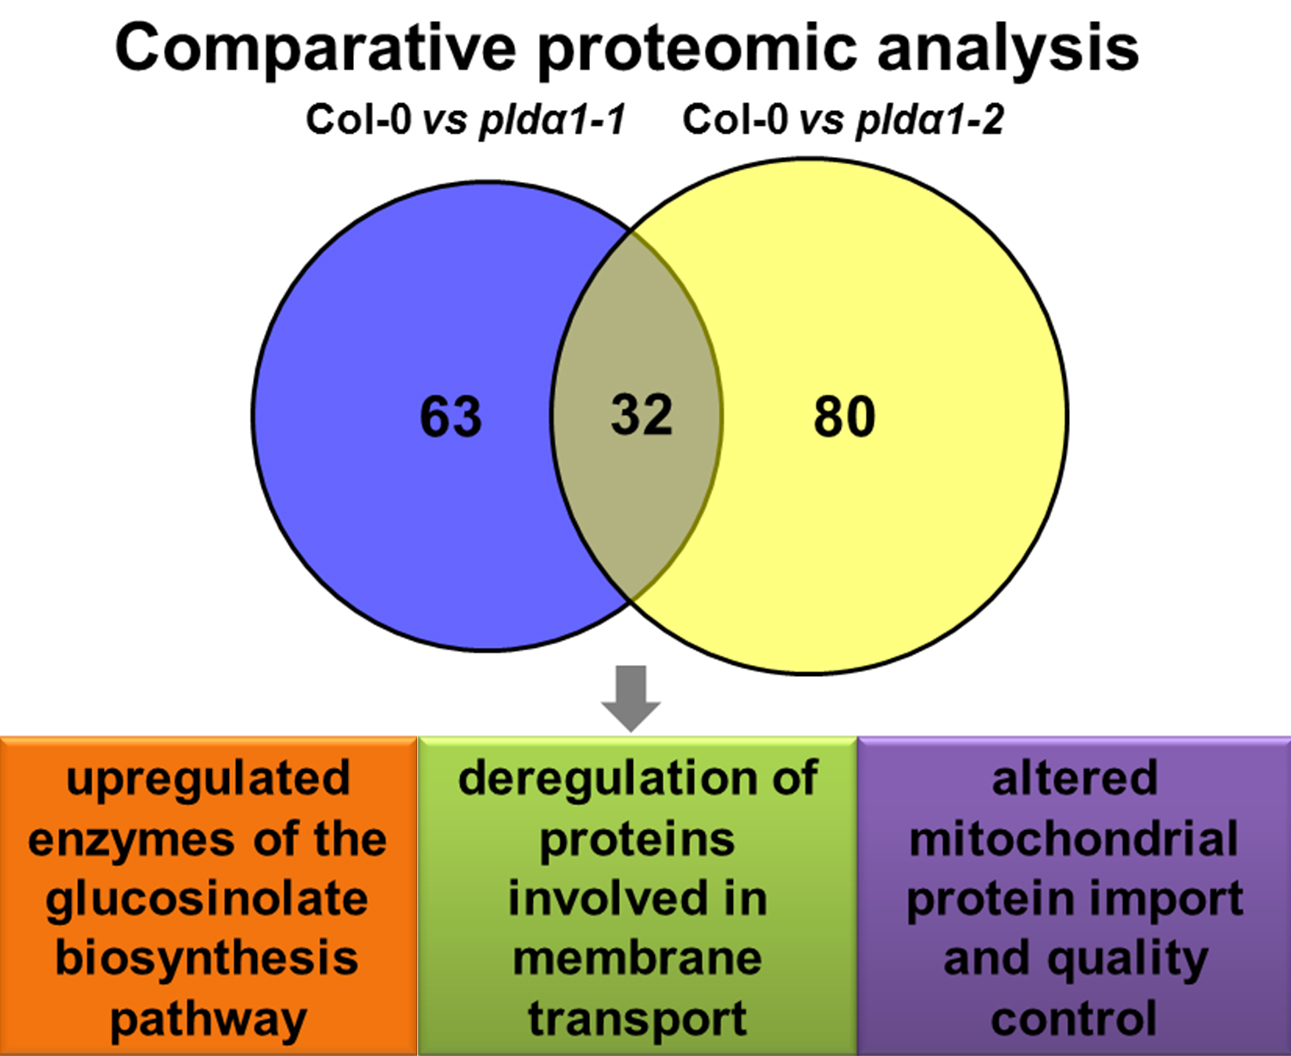 Ijms Free Full Text Shot Gun Proteomic Analysis On Roots Of Arabidopsis Plda1 Mutants Suggesting The Involvement Of Plda1 In Mitochondrial Protein Import Vesicular Trafficking And Glucosinolate Biosynthesis Html